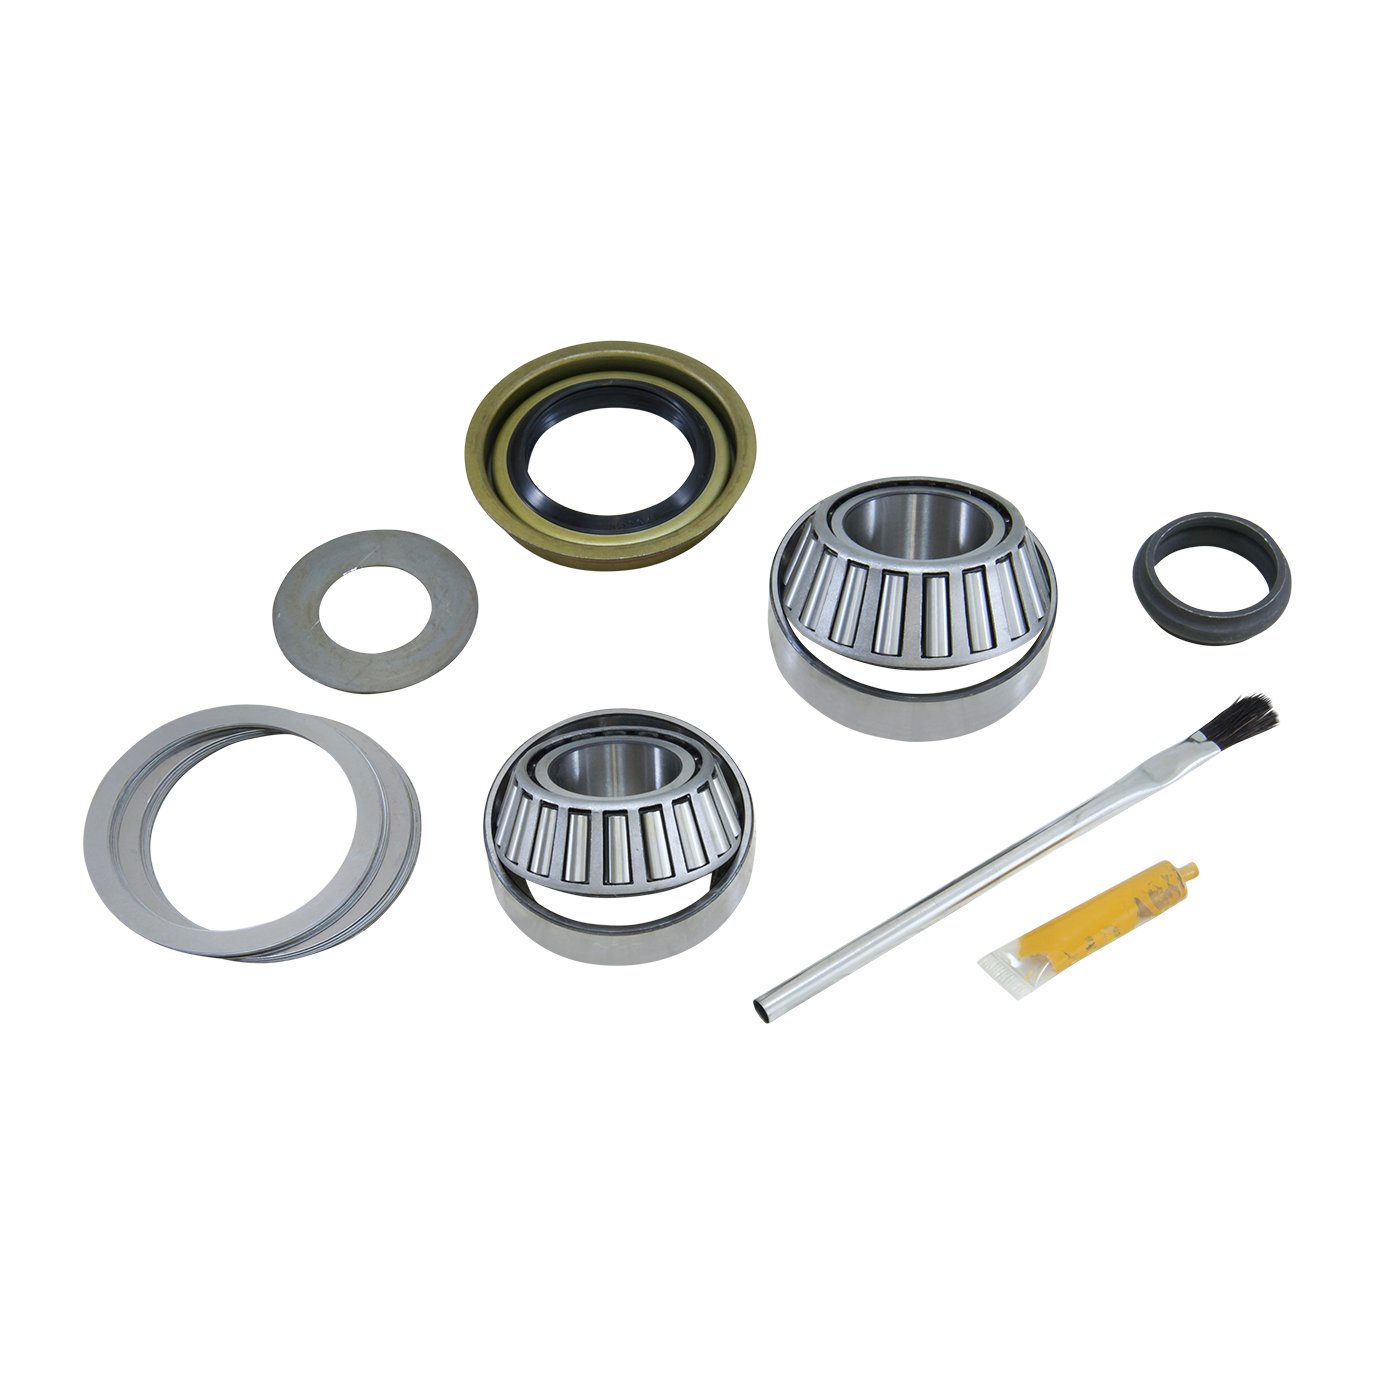 Pinion Install Kit For Model 35 Ifs Differential For Explorer And Ranger